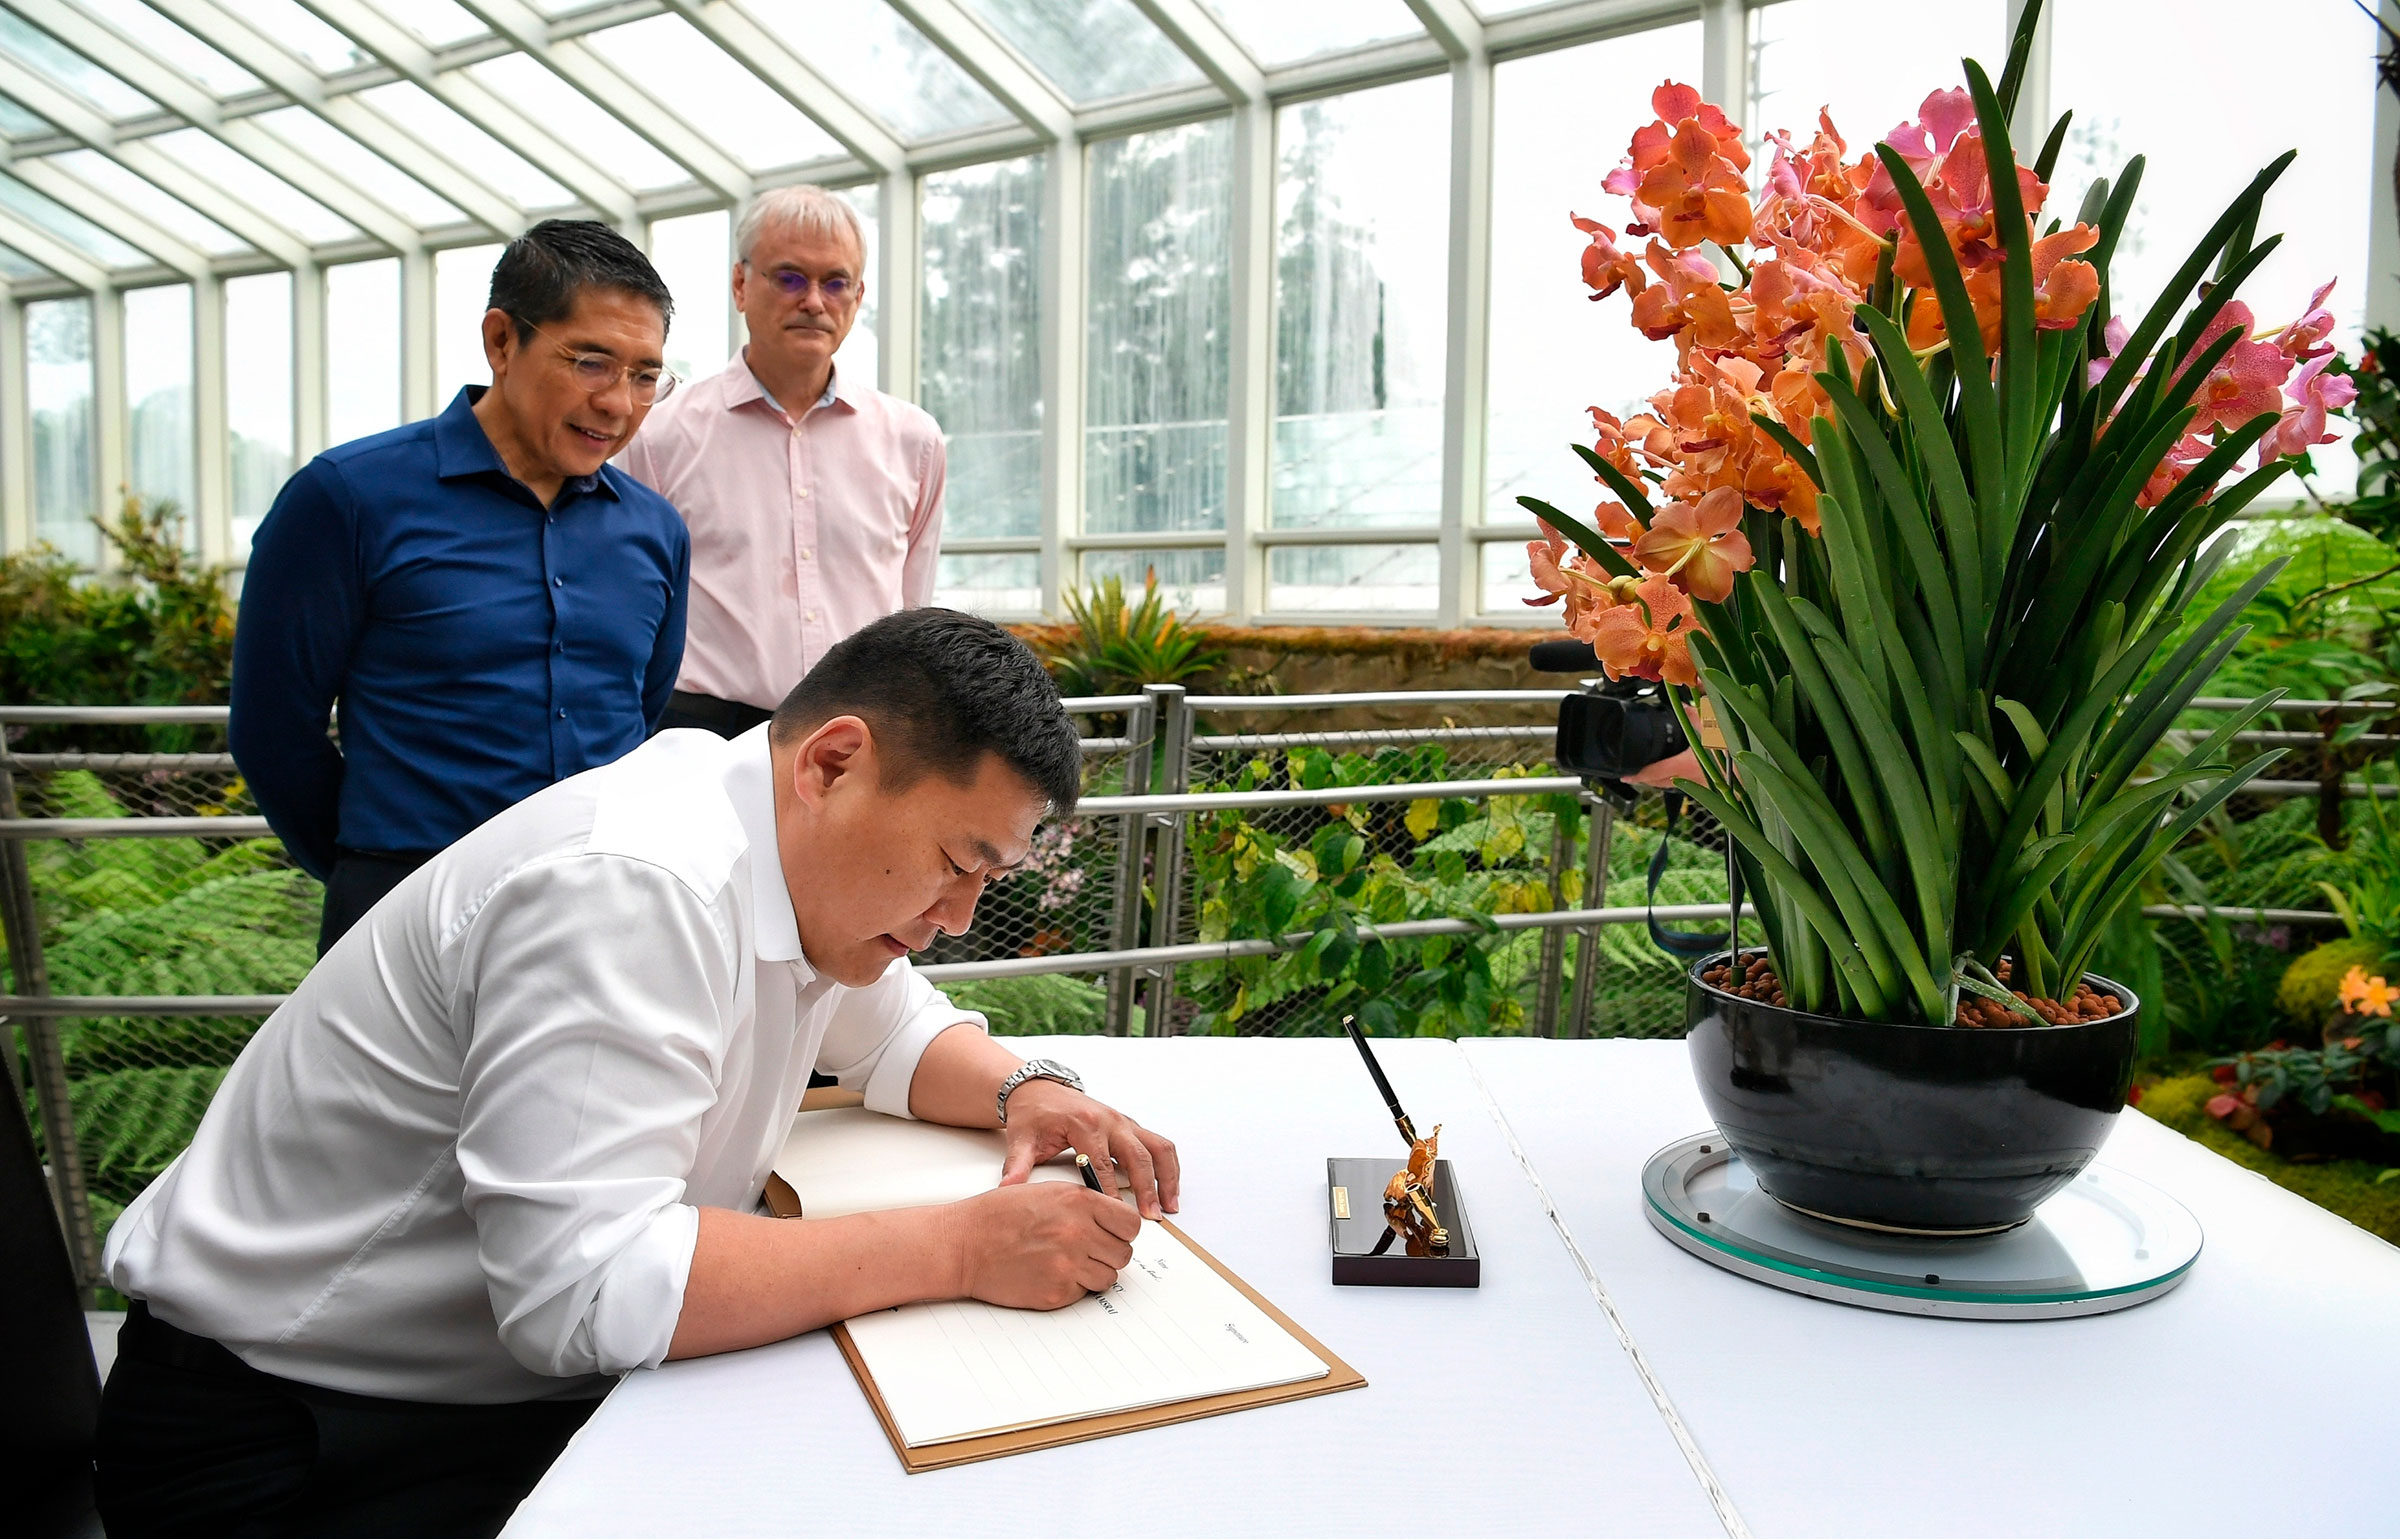 Mongolian Prime Minister Oyun-Erdene Luvsannamsrai signing the guest book at the National Orchid Garden during his four-day visit to Singapore, on July 8, 2022. (Singapore Press/AP)